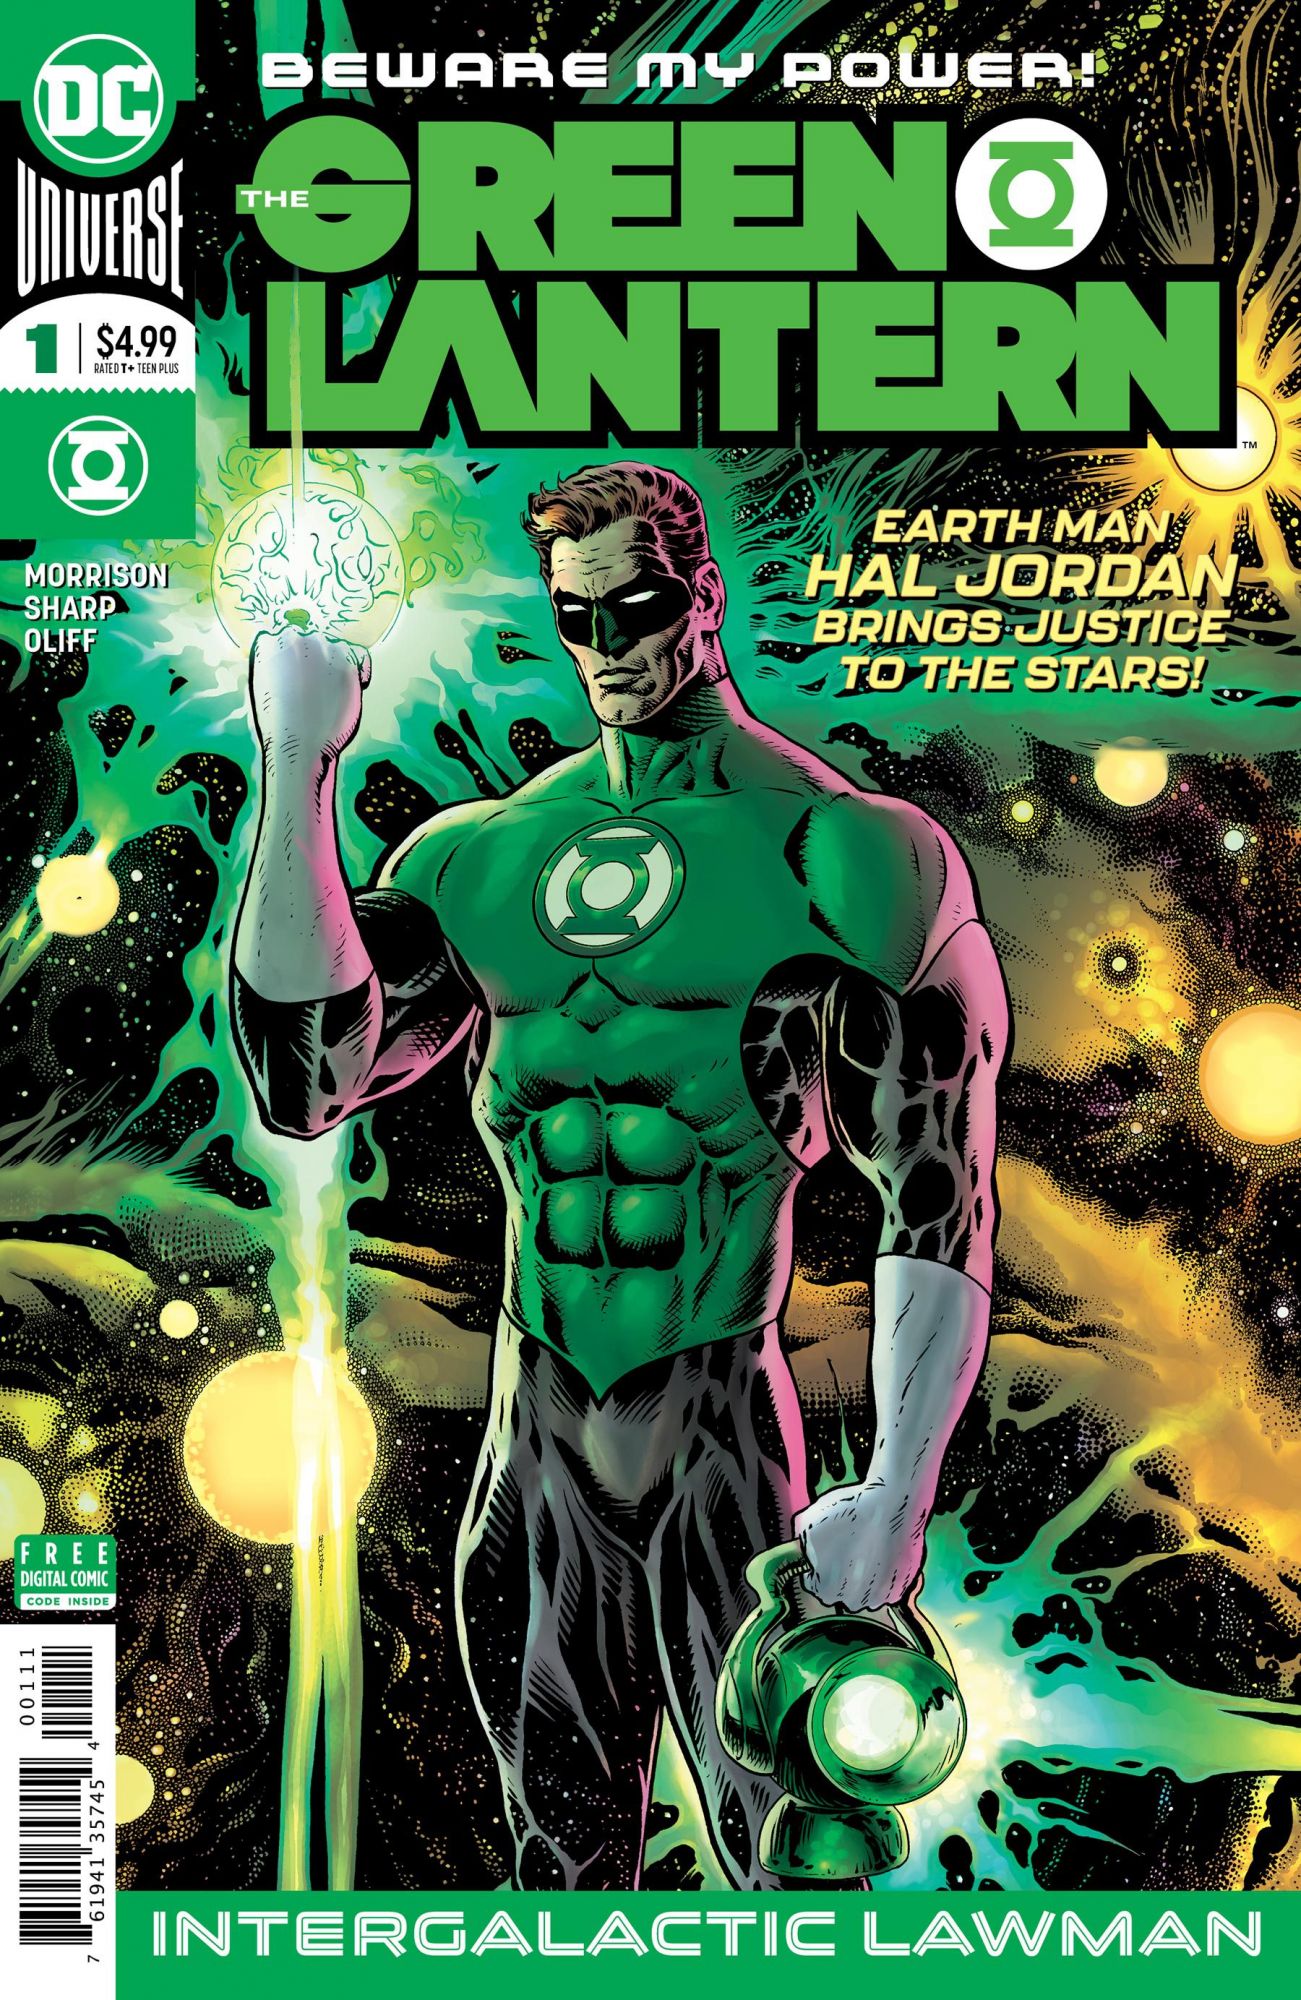 Green Lantern #24 LIGHTS OUT Set pt 1 2 3 4 5 Corps Red Annual Guardians NEW 52 